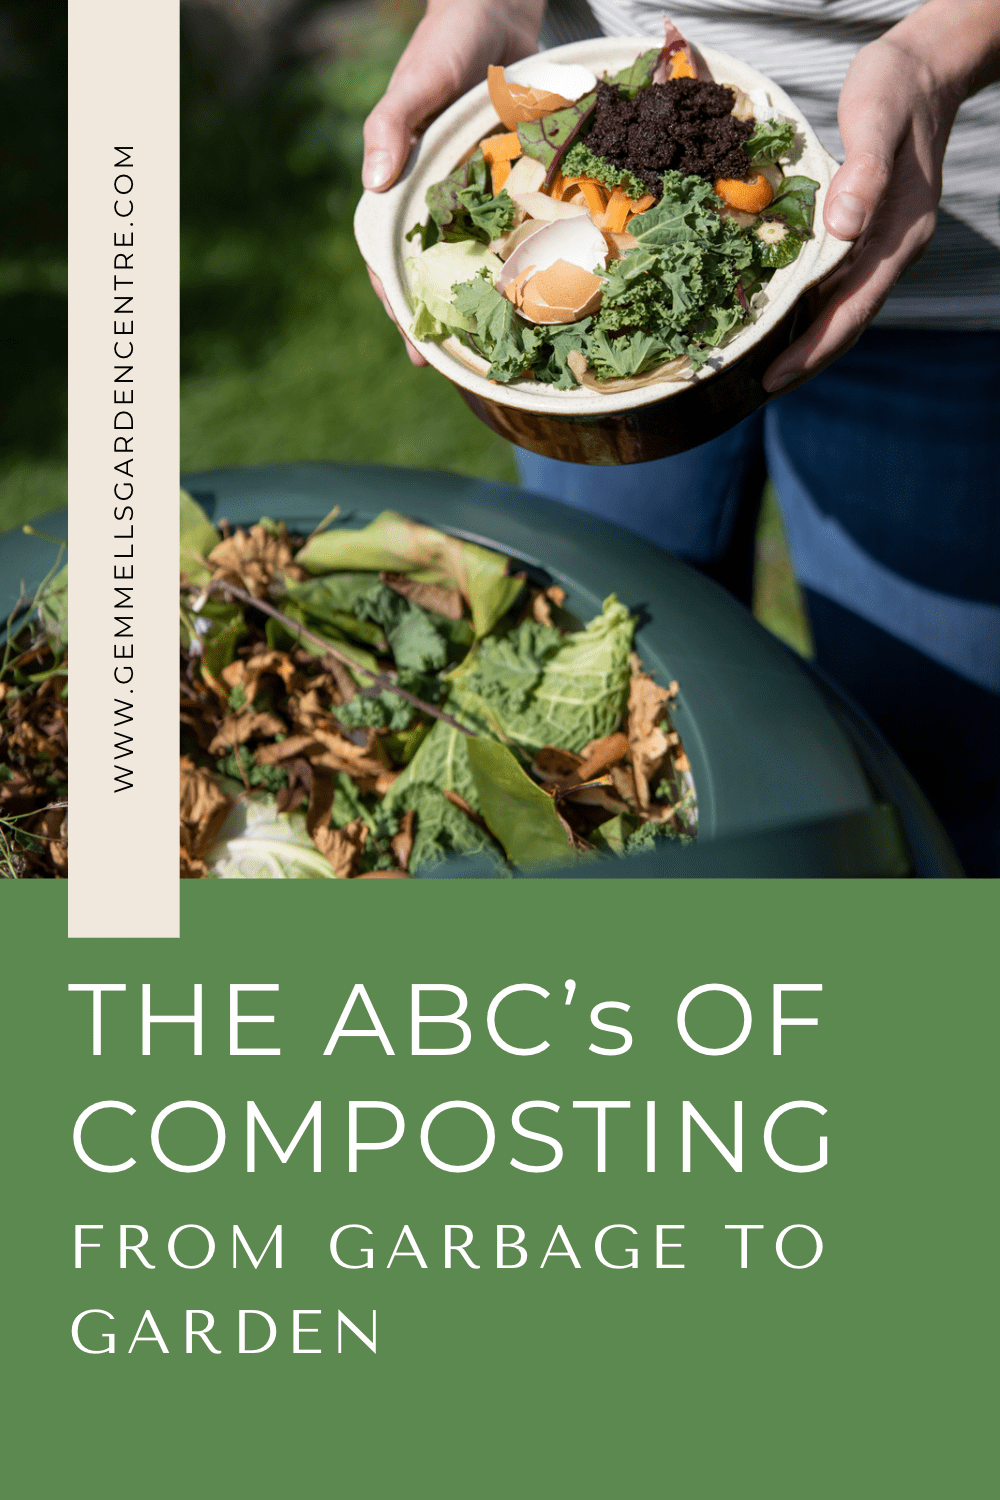 Garbage to Garden | Composting Best Practices | The ABC’s of Composting